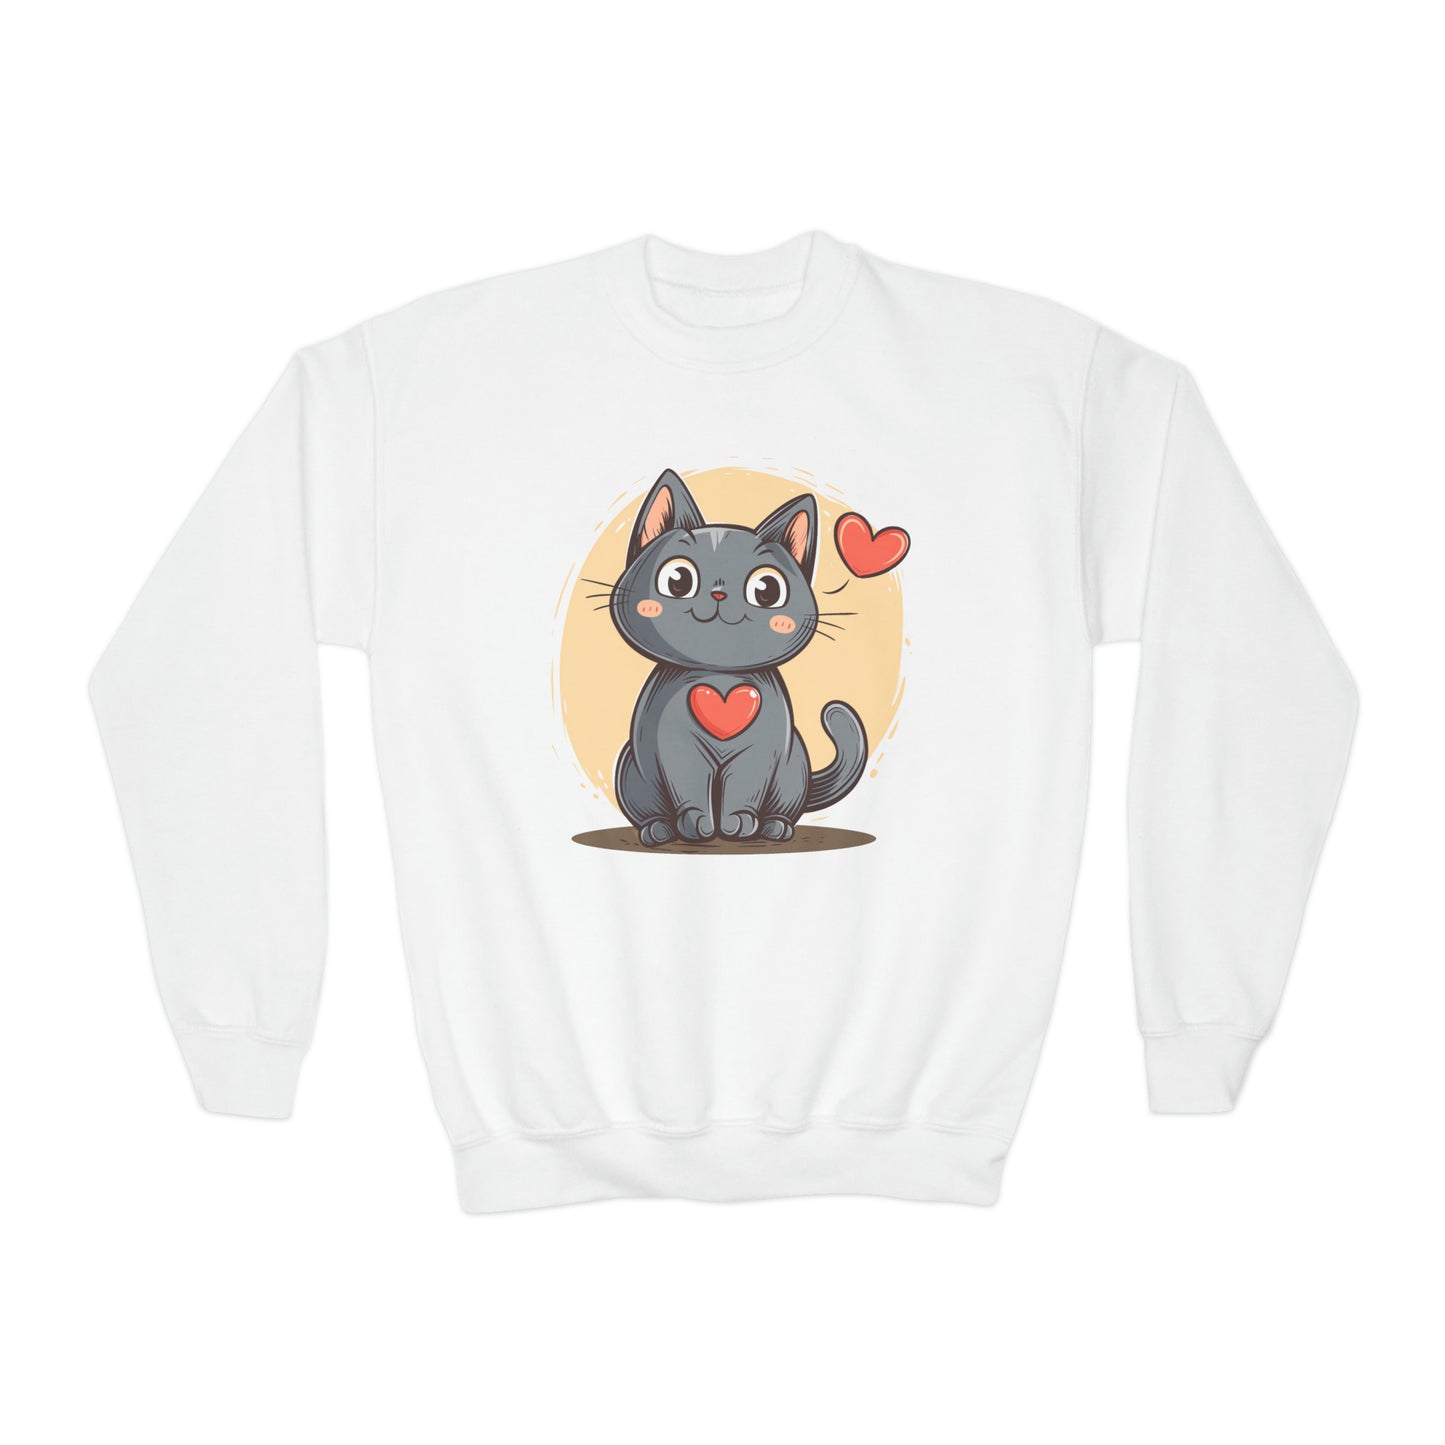 Cat Kids Sweatshirt, Kitten Heart Animal Lover Pullover Personalized Design Printed Boys Girls Gift Graphic Cotton Crewneck Pullover Top